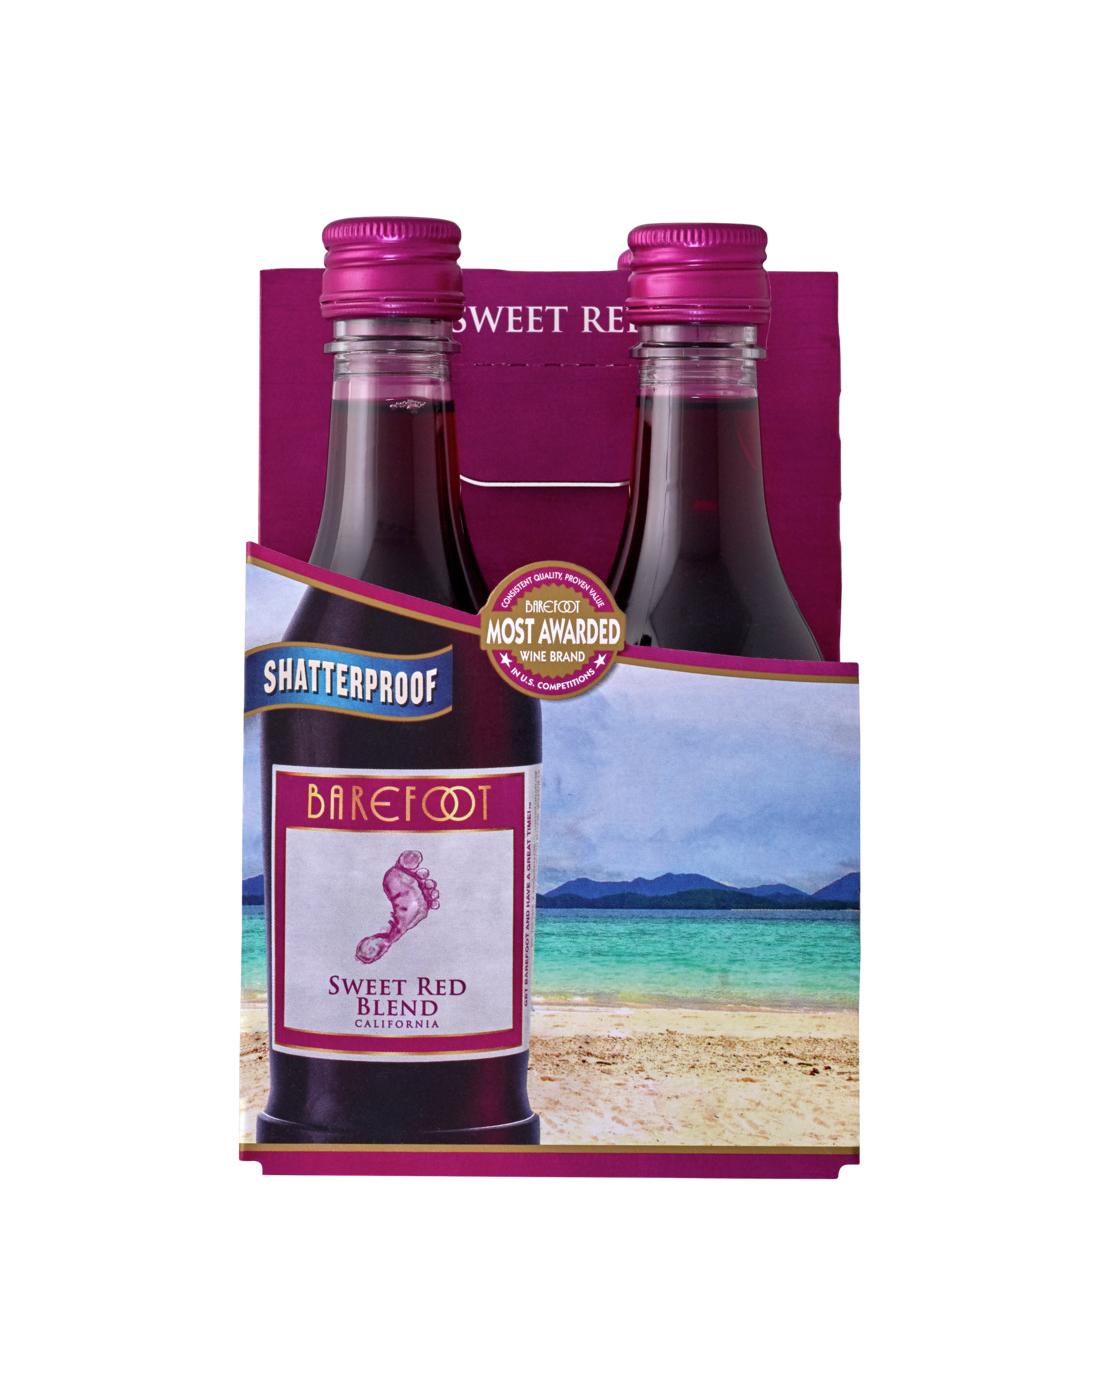 Barefoot Sweet Red Wine 187 mL; image 1 of 5